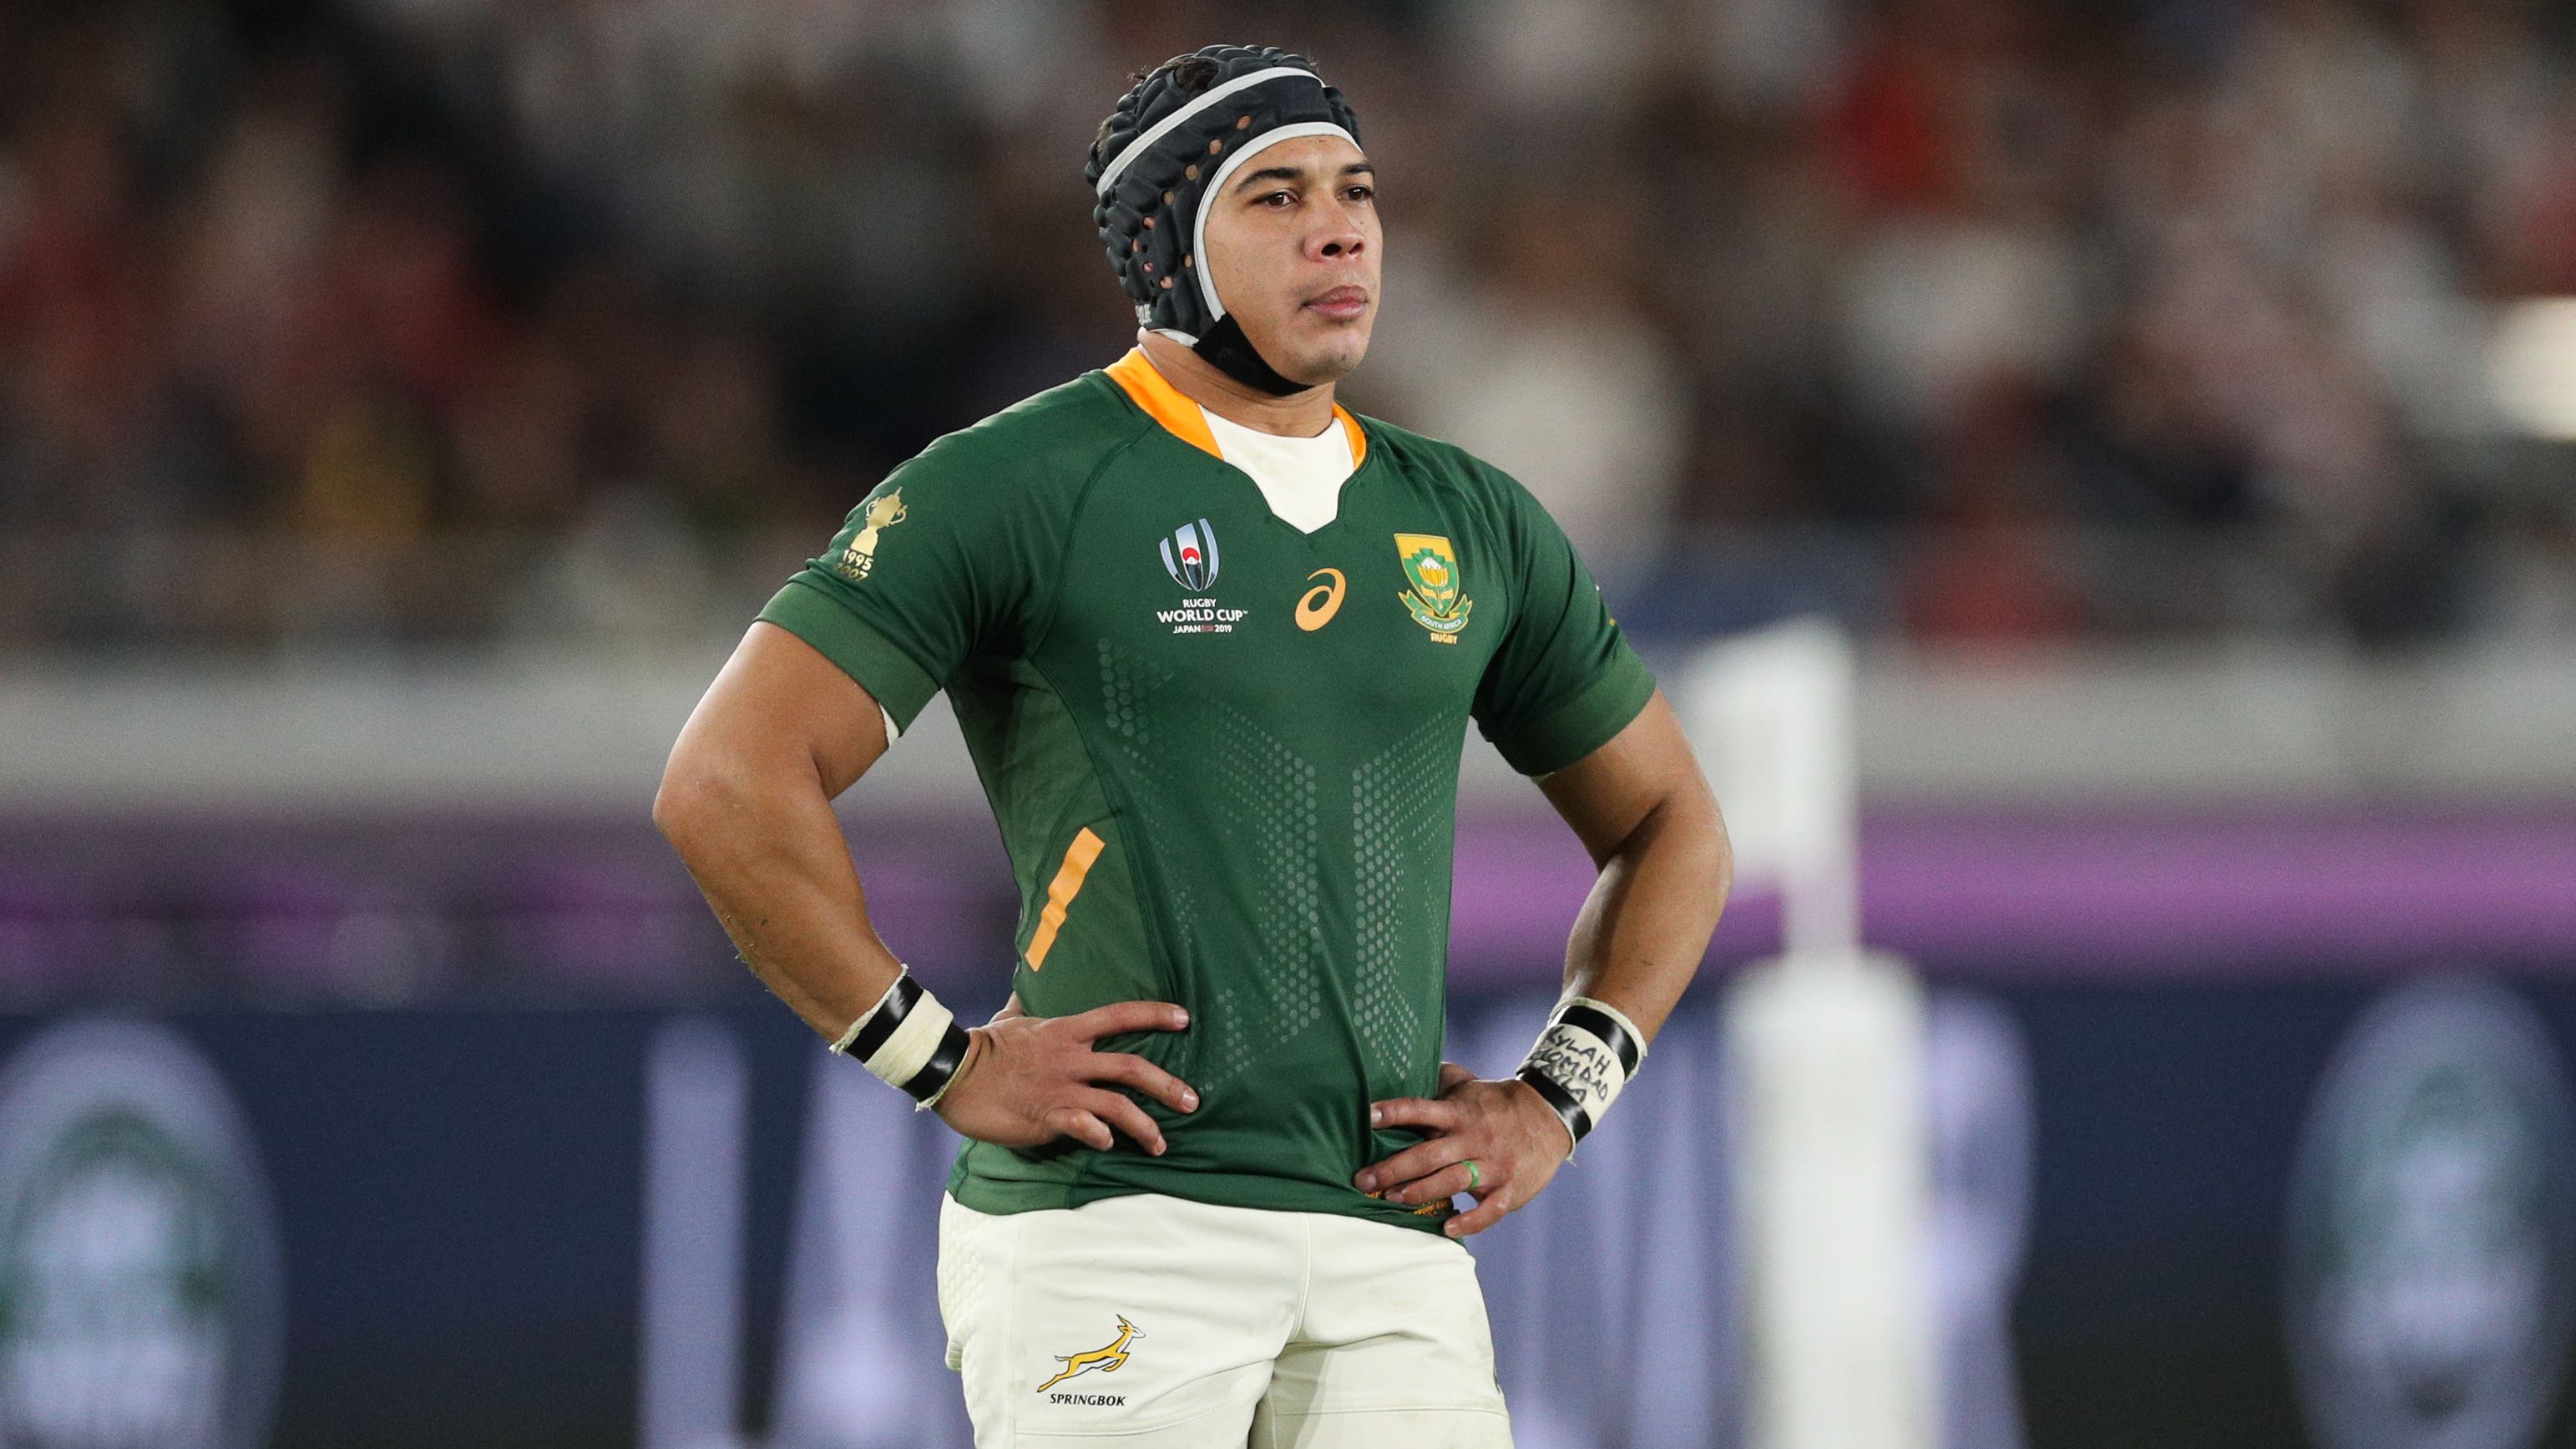 Springboks superstar ruled out of Wallabies Test